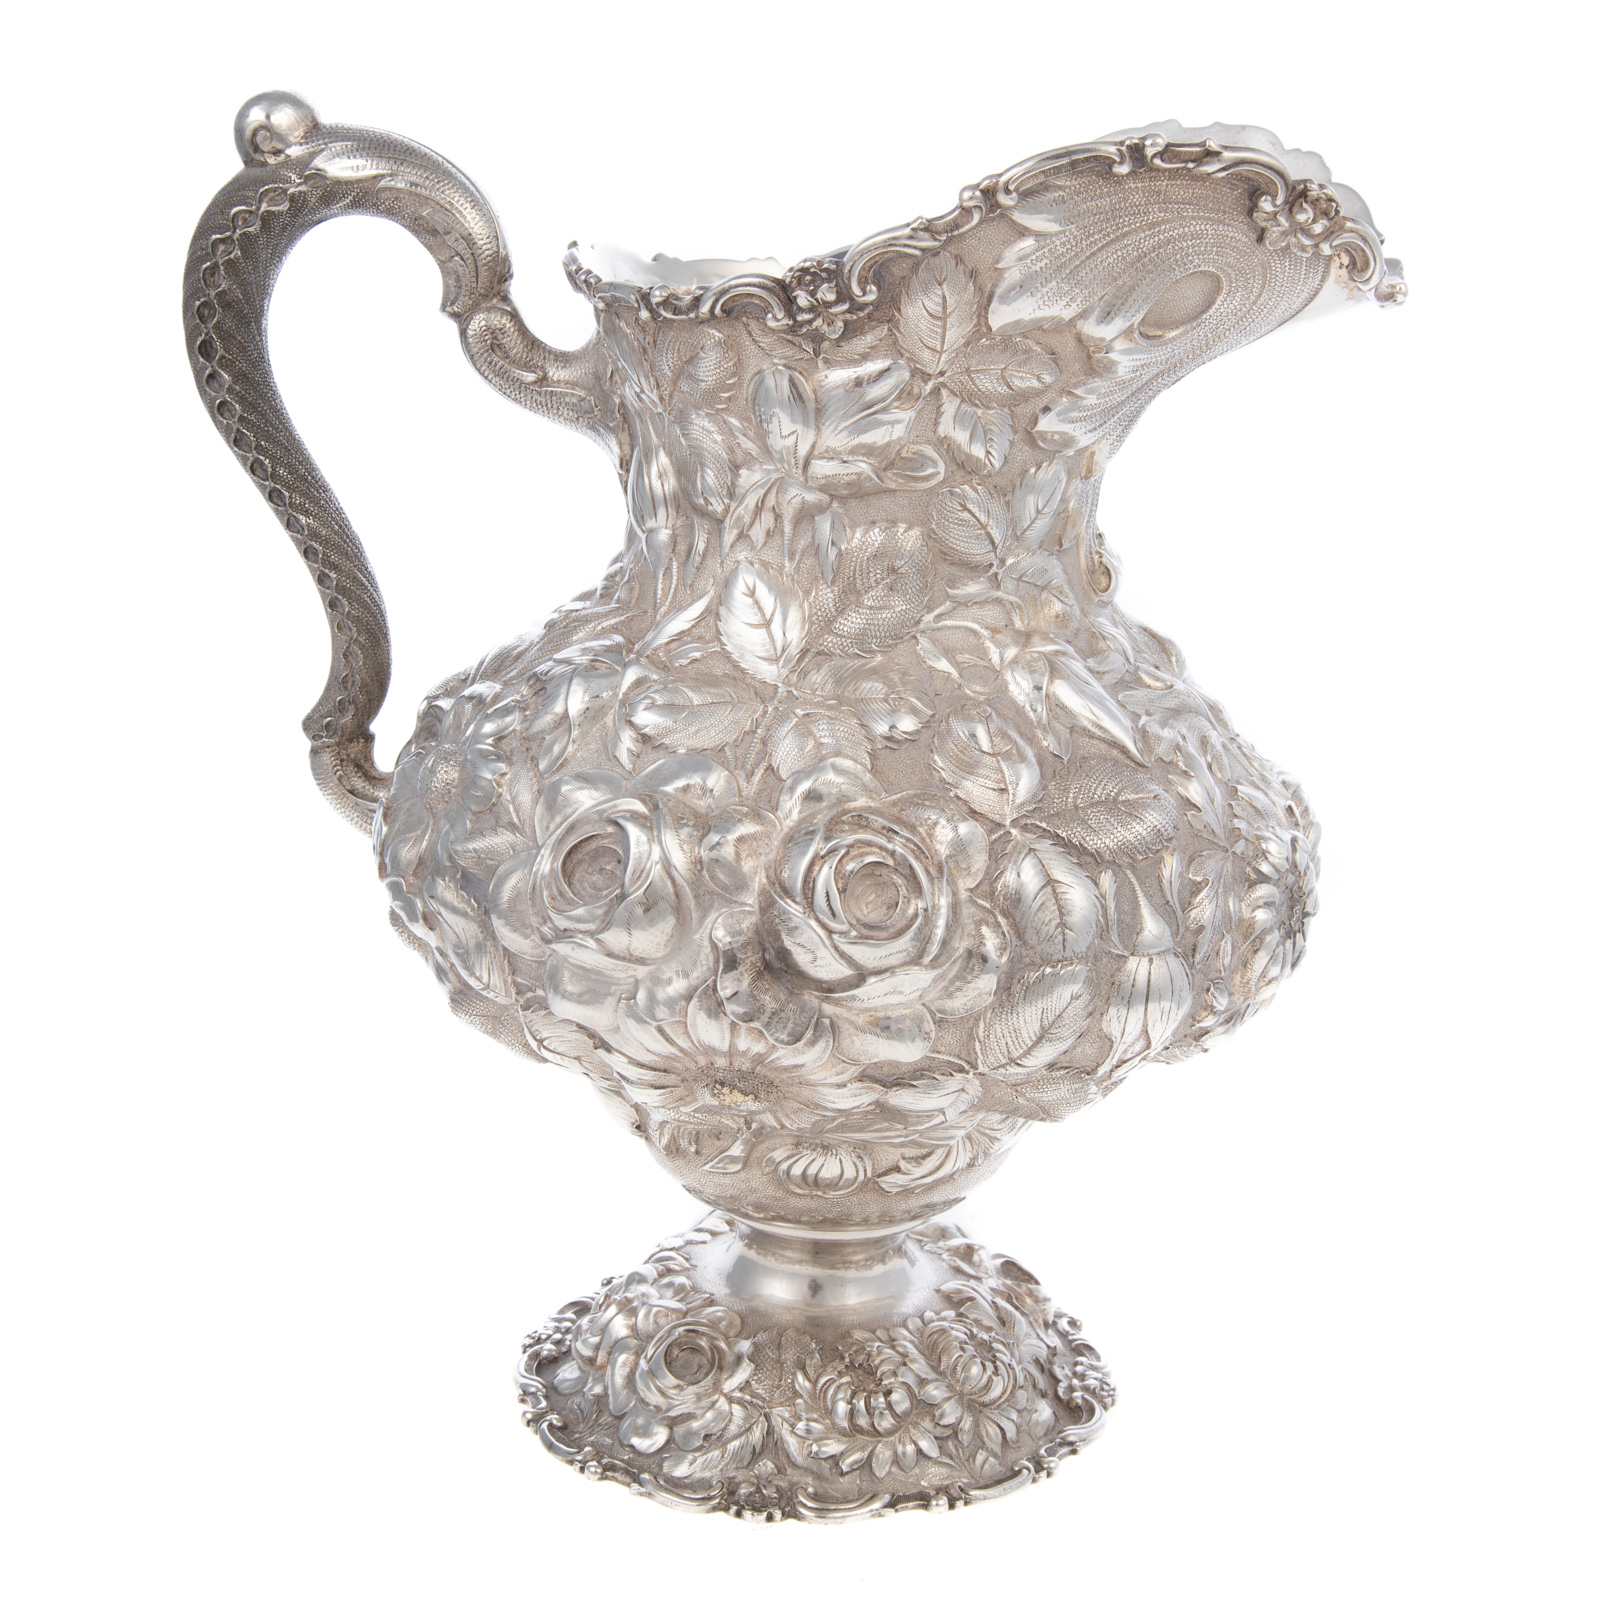 STIEFF STERLING REPOUSSE WATER 338e03